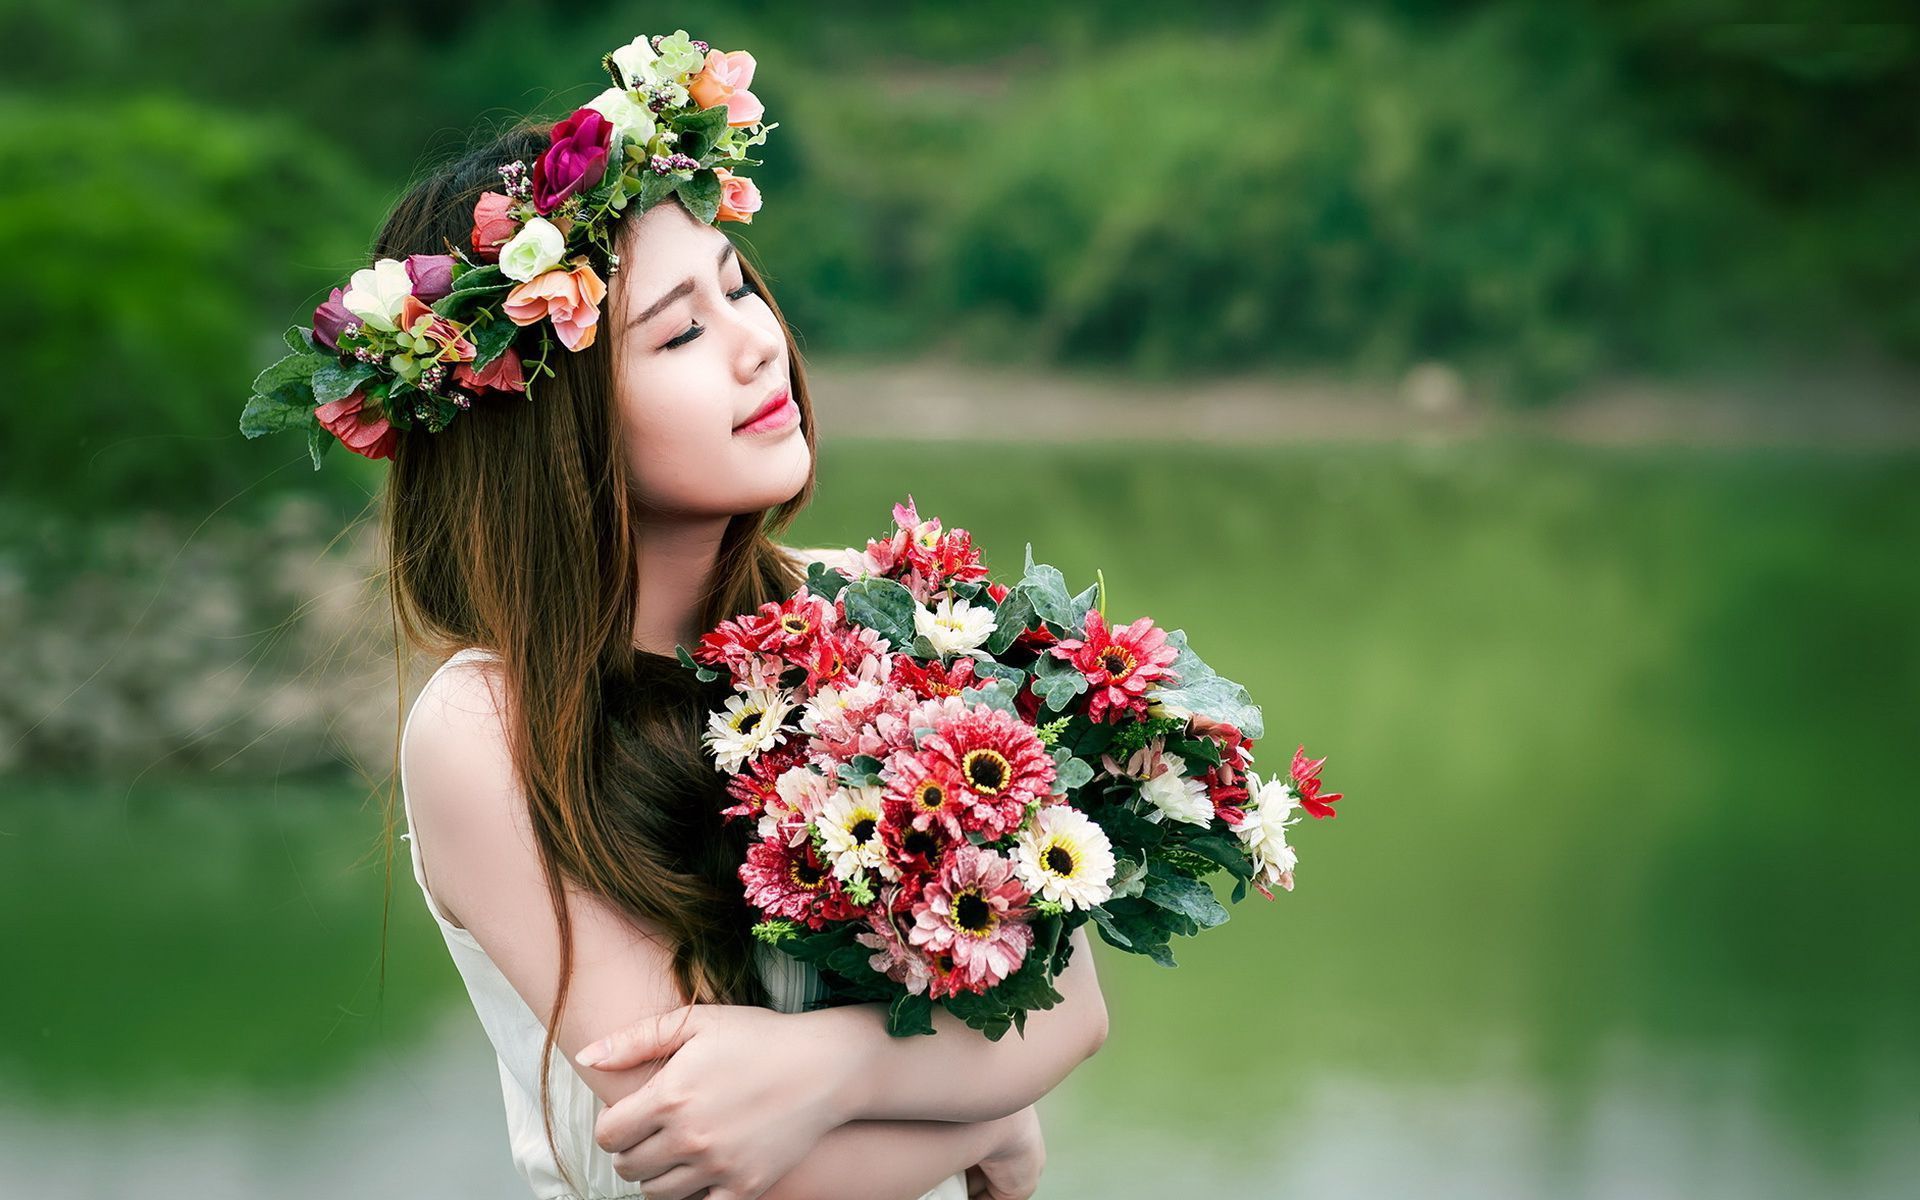 Free photo: Girls with Flowers, Woman, Teen